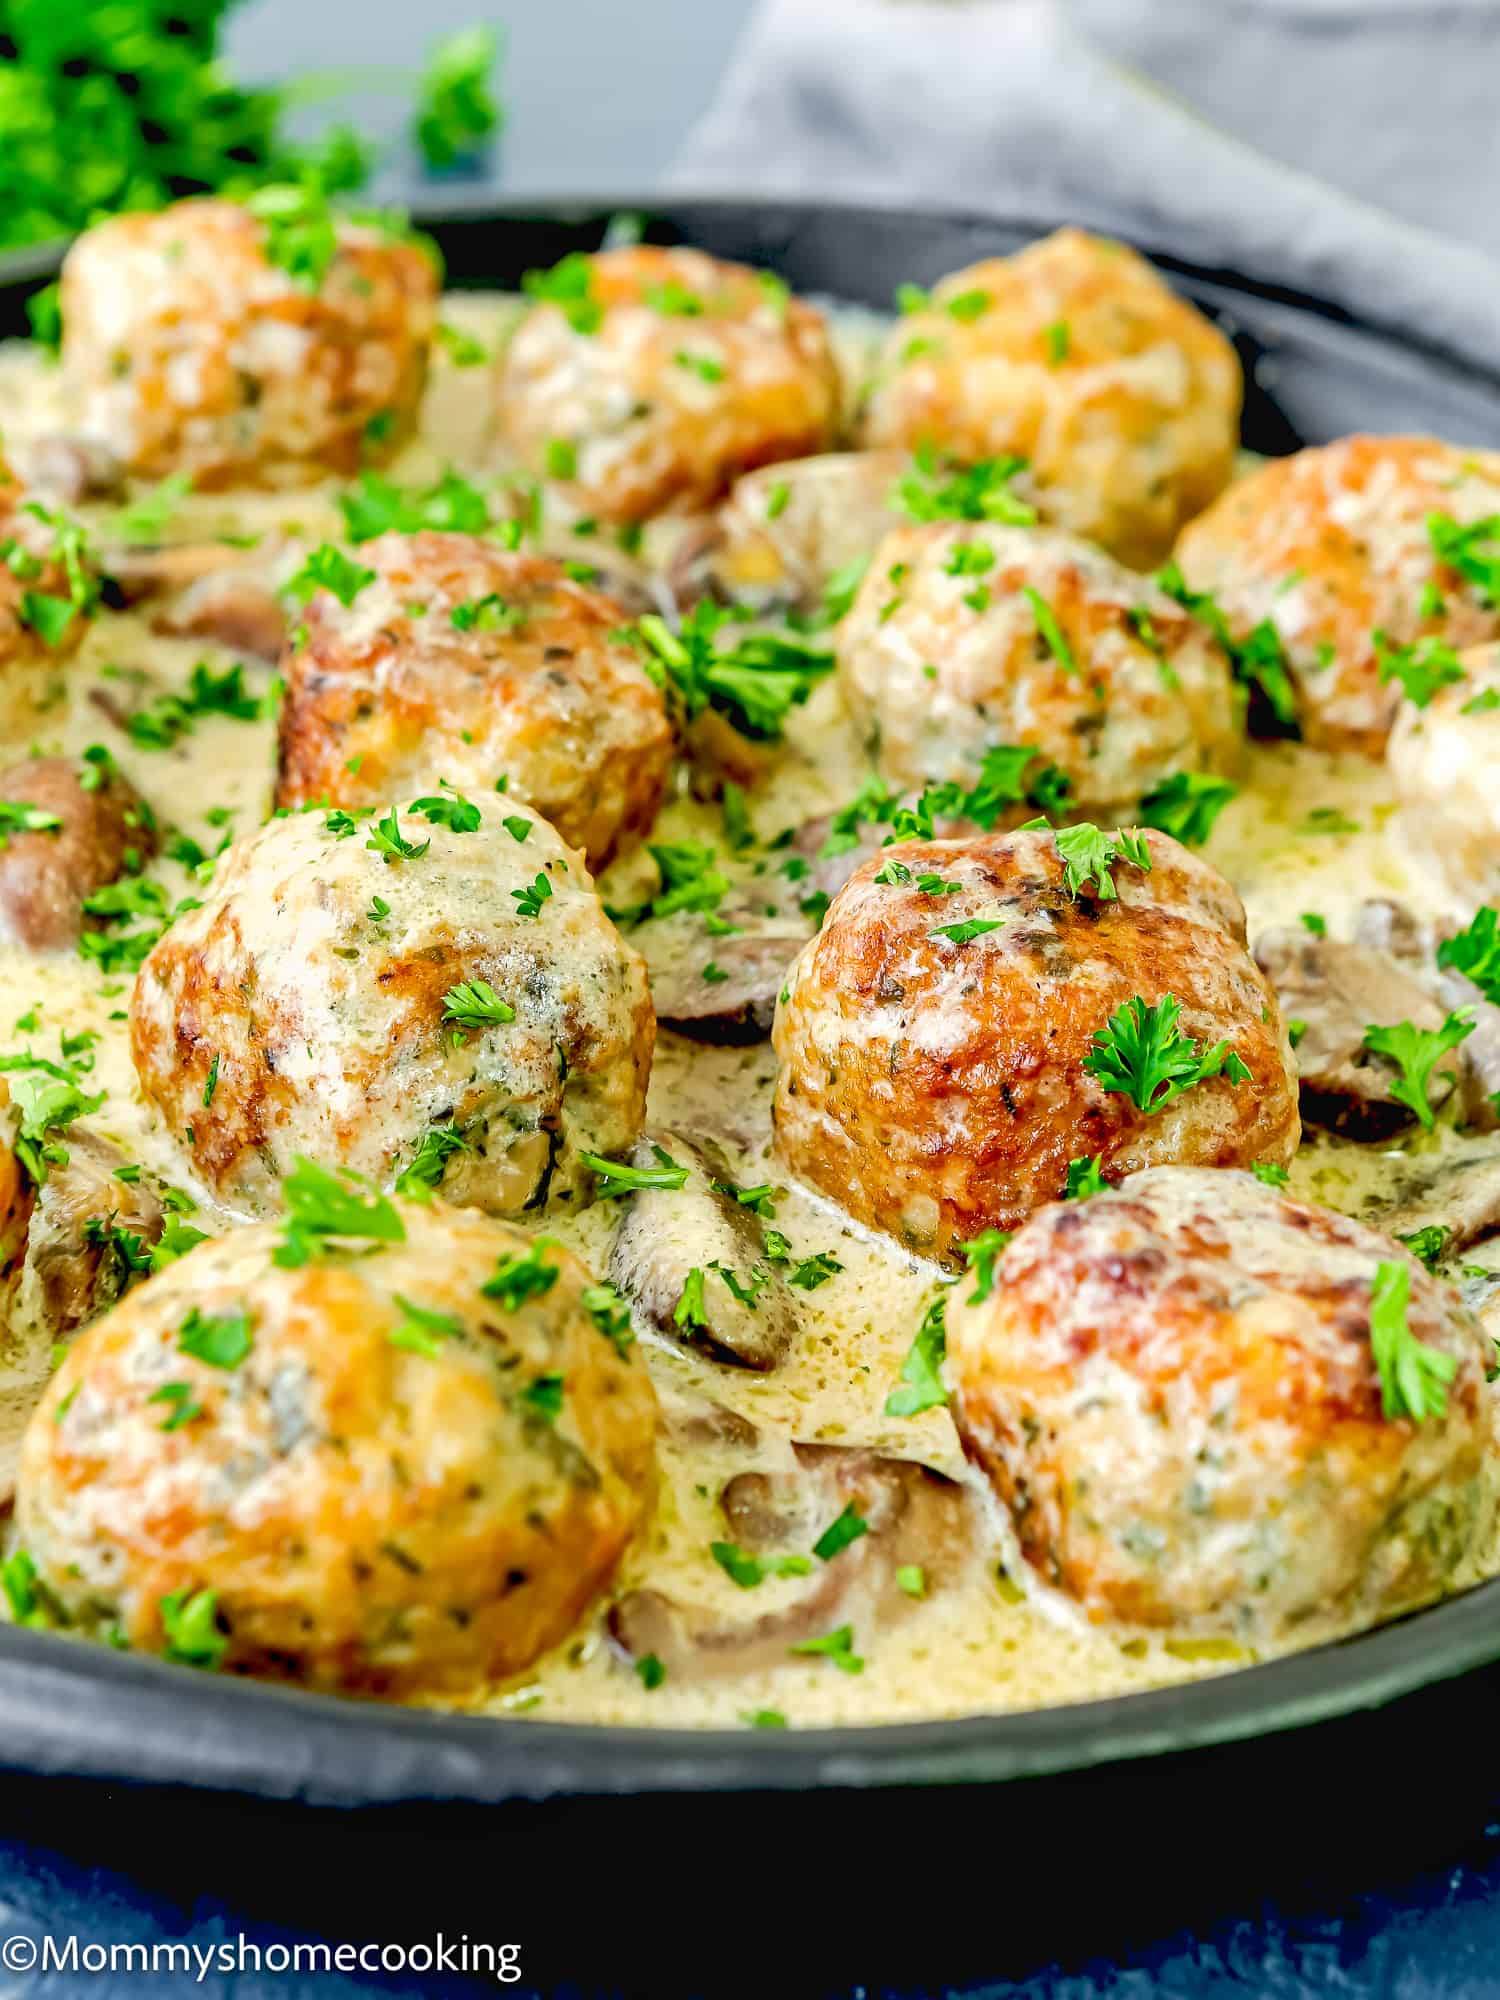 Stroganoff Meatballs with eggs with creamy sauce in a plate over a grey surface.